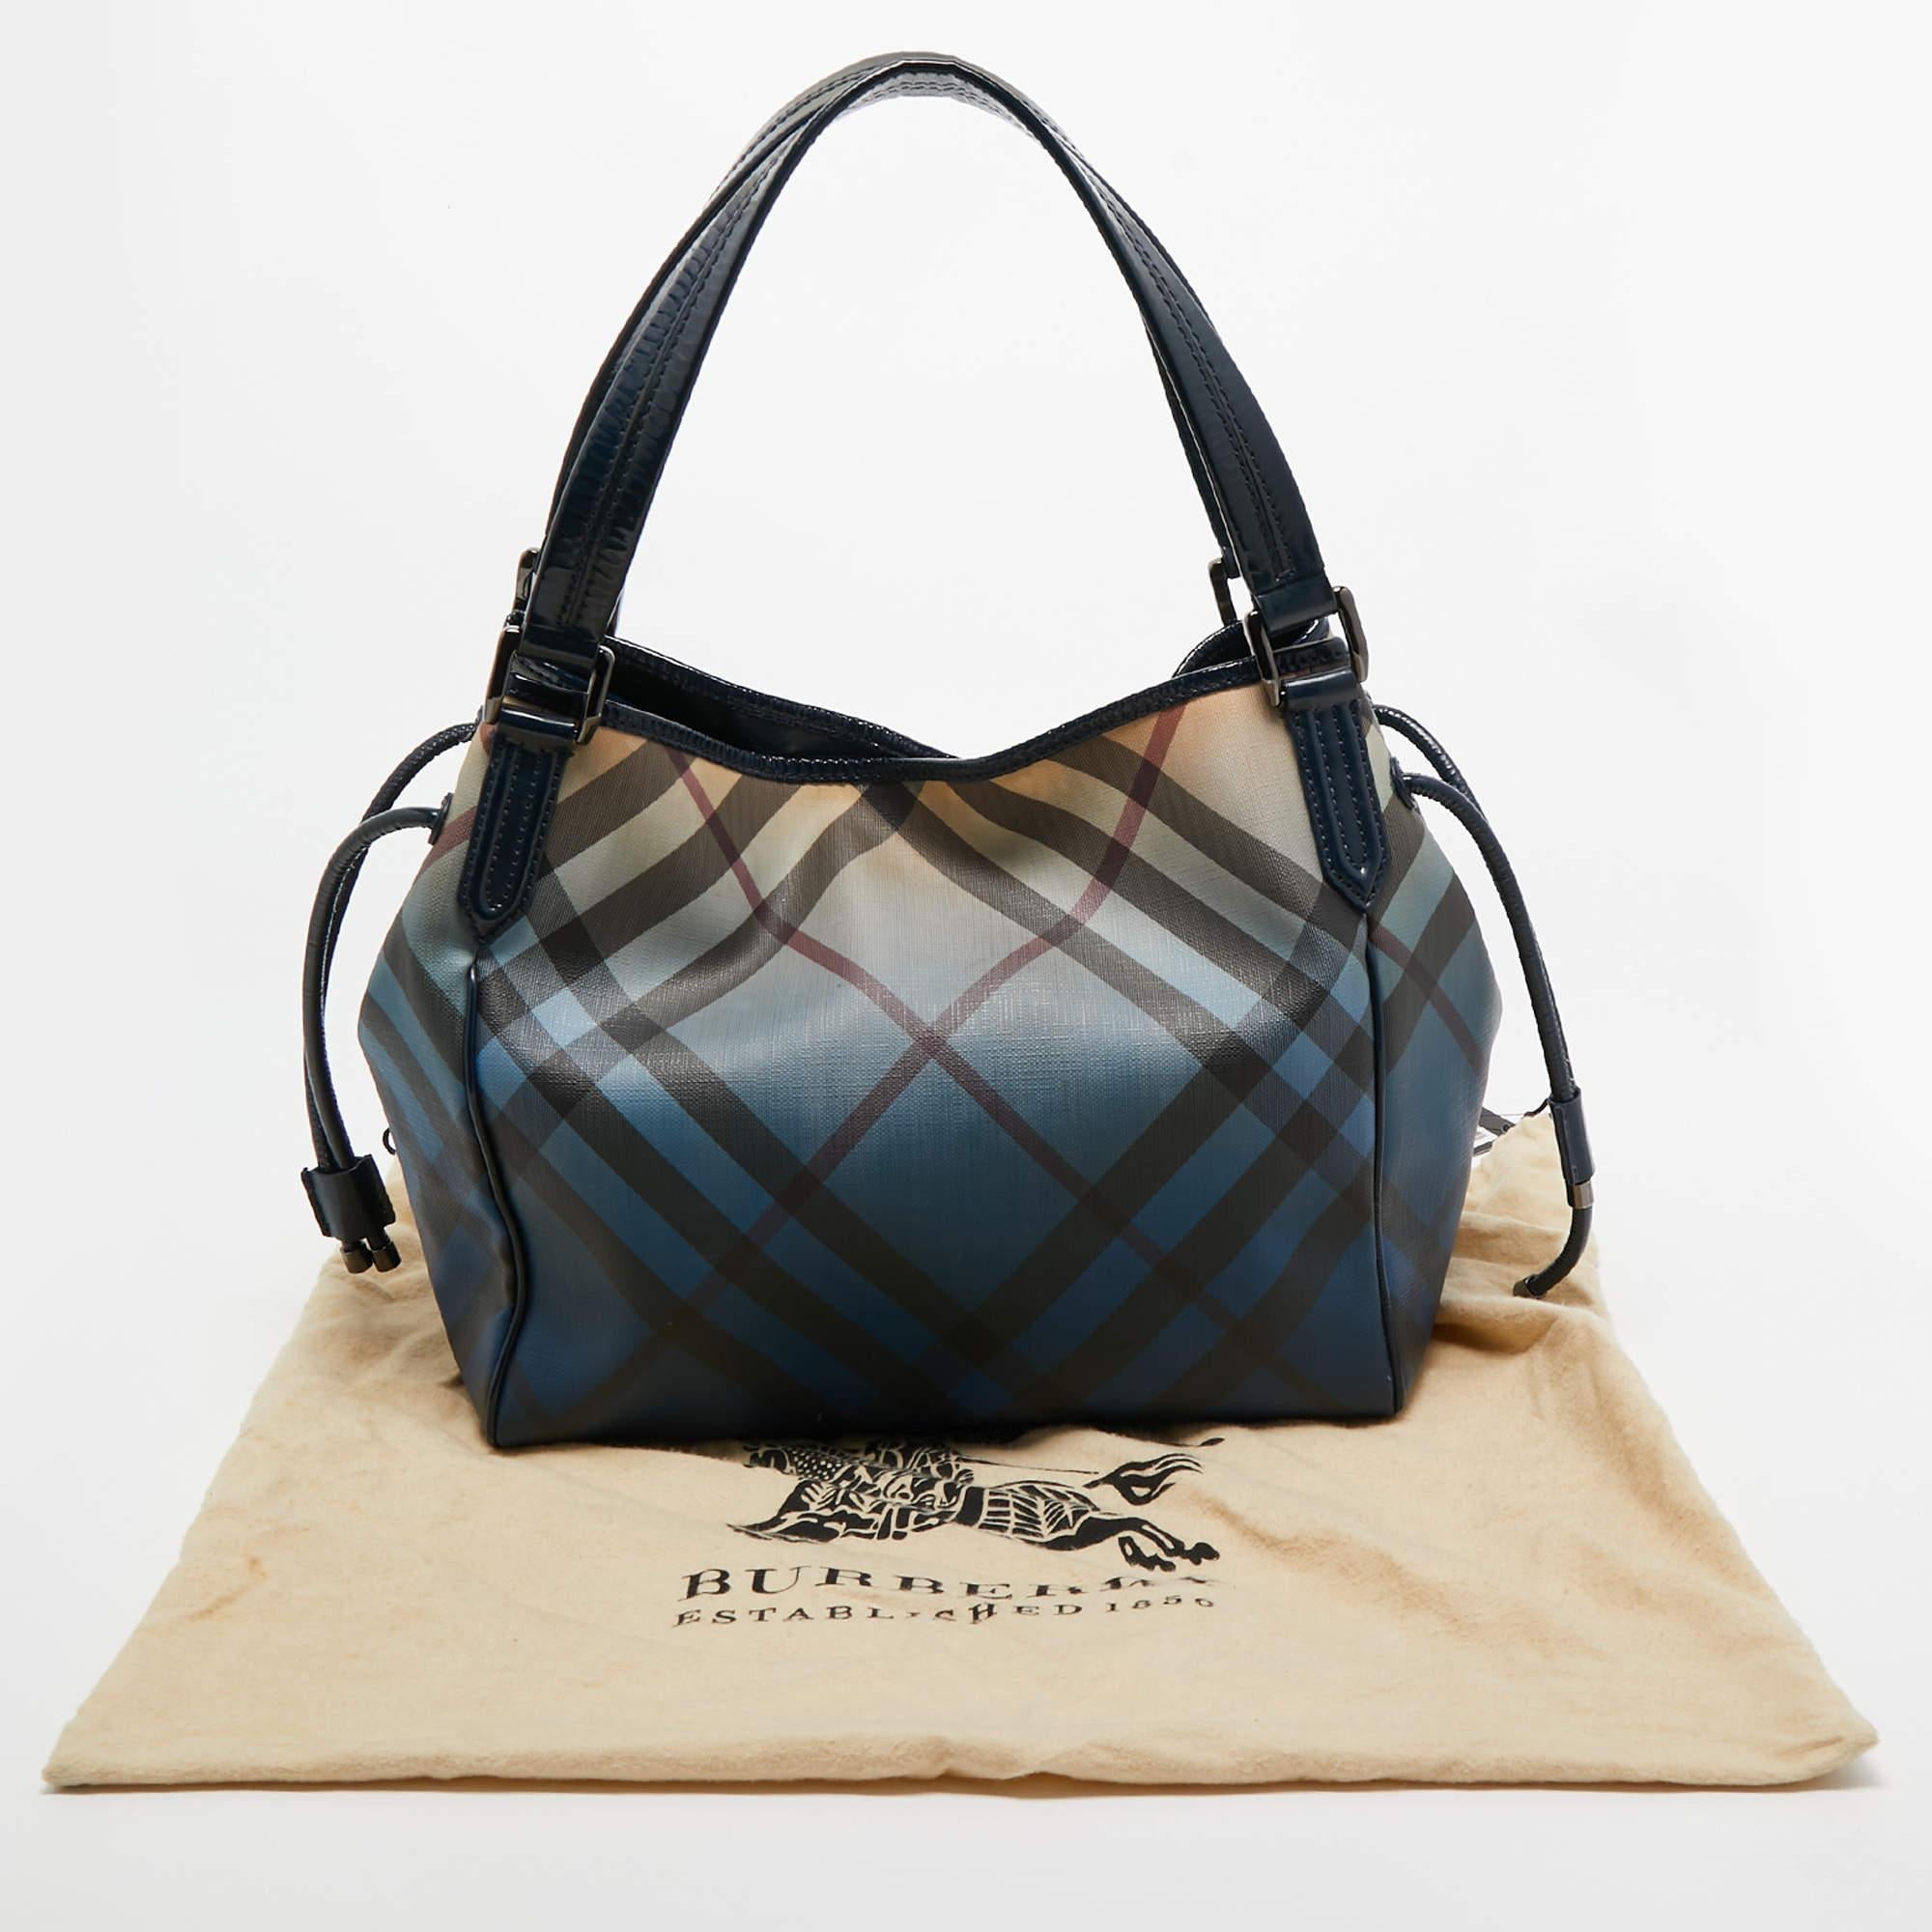 Burberry Navy Blue/Beige Ombre PVC and Patent Leather Biltmore Tote 9